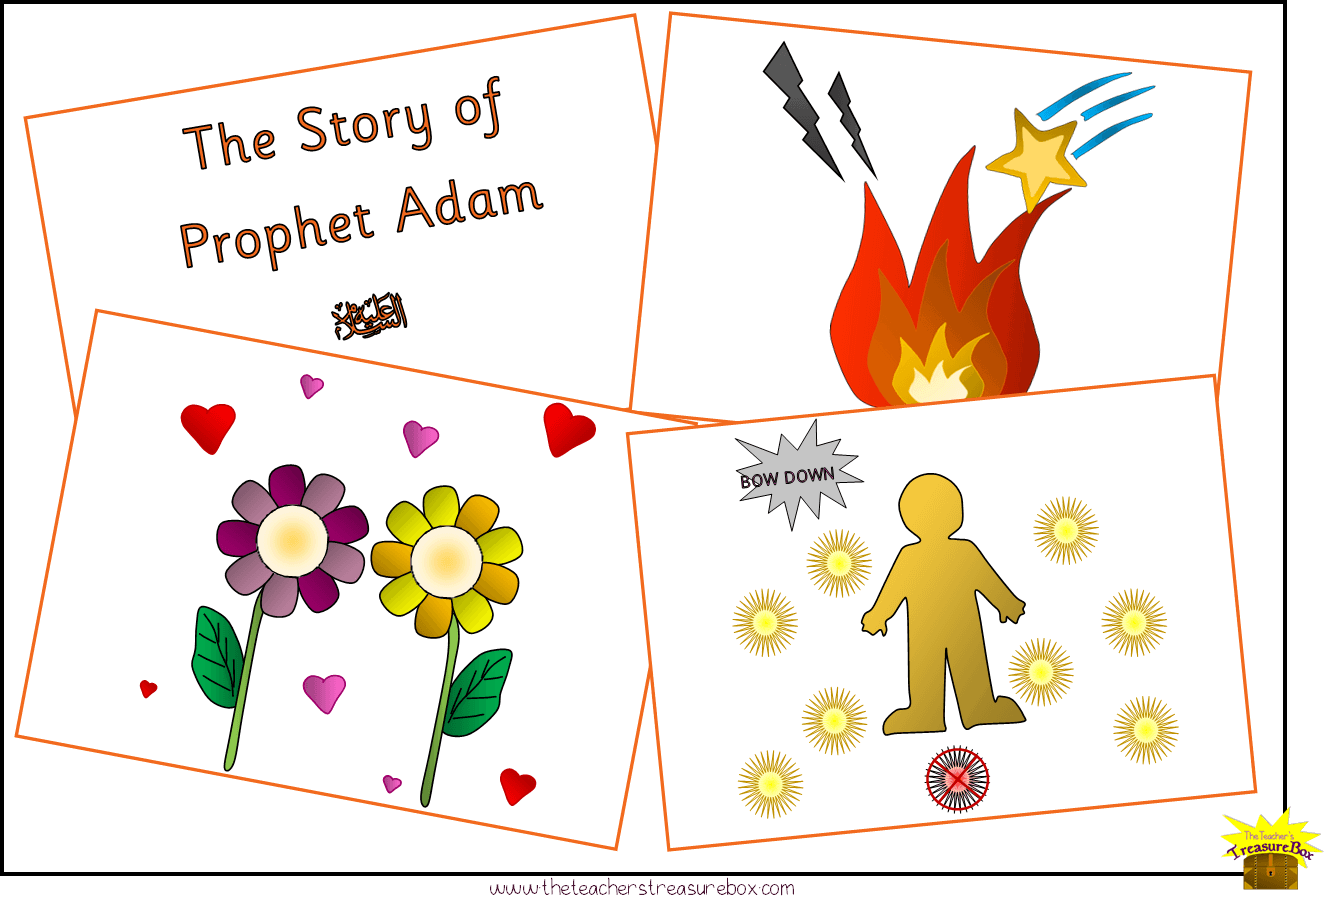 The Story of Prophet Adam Ordering Cards